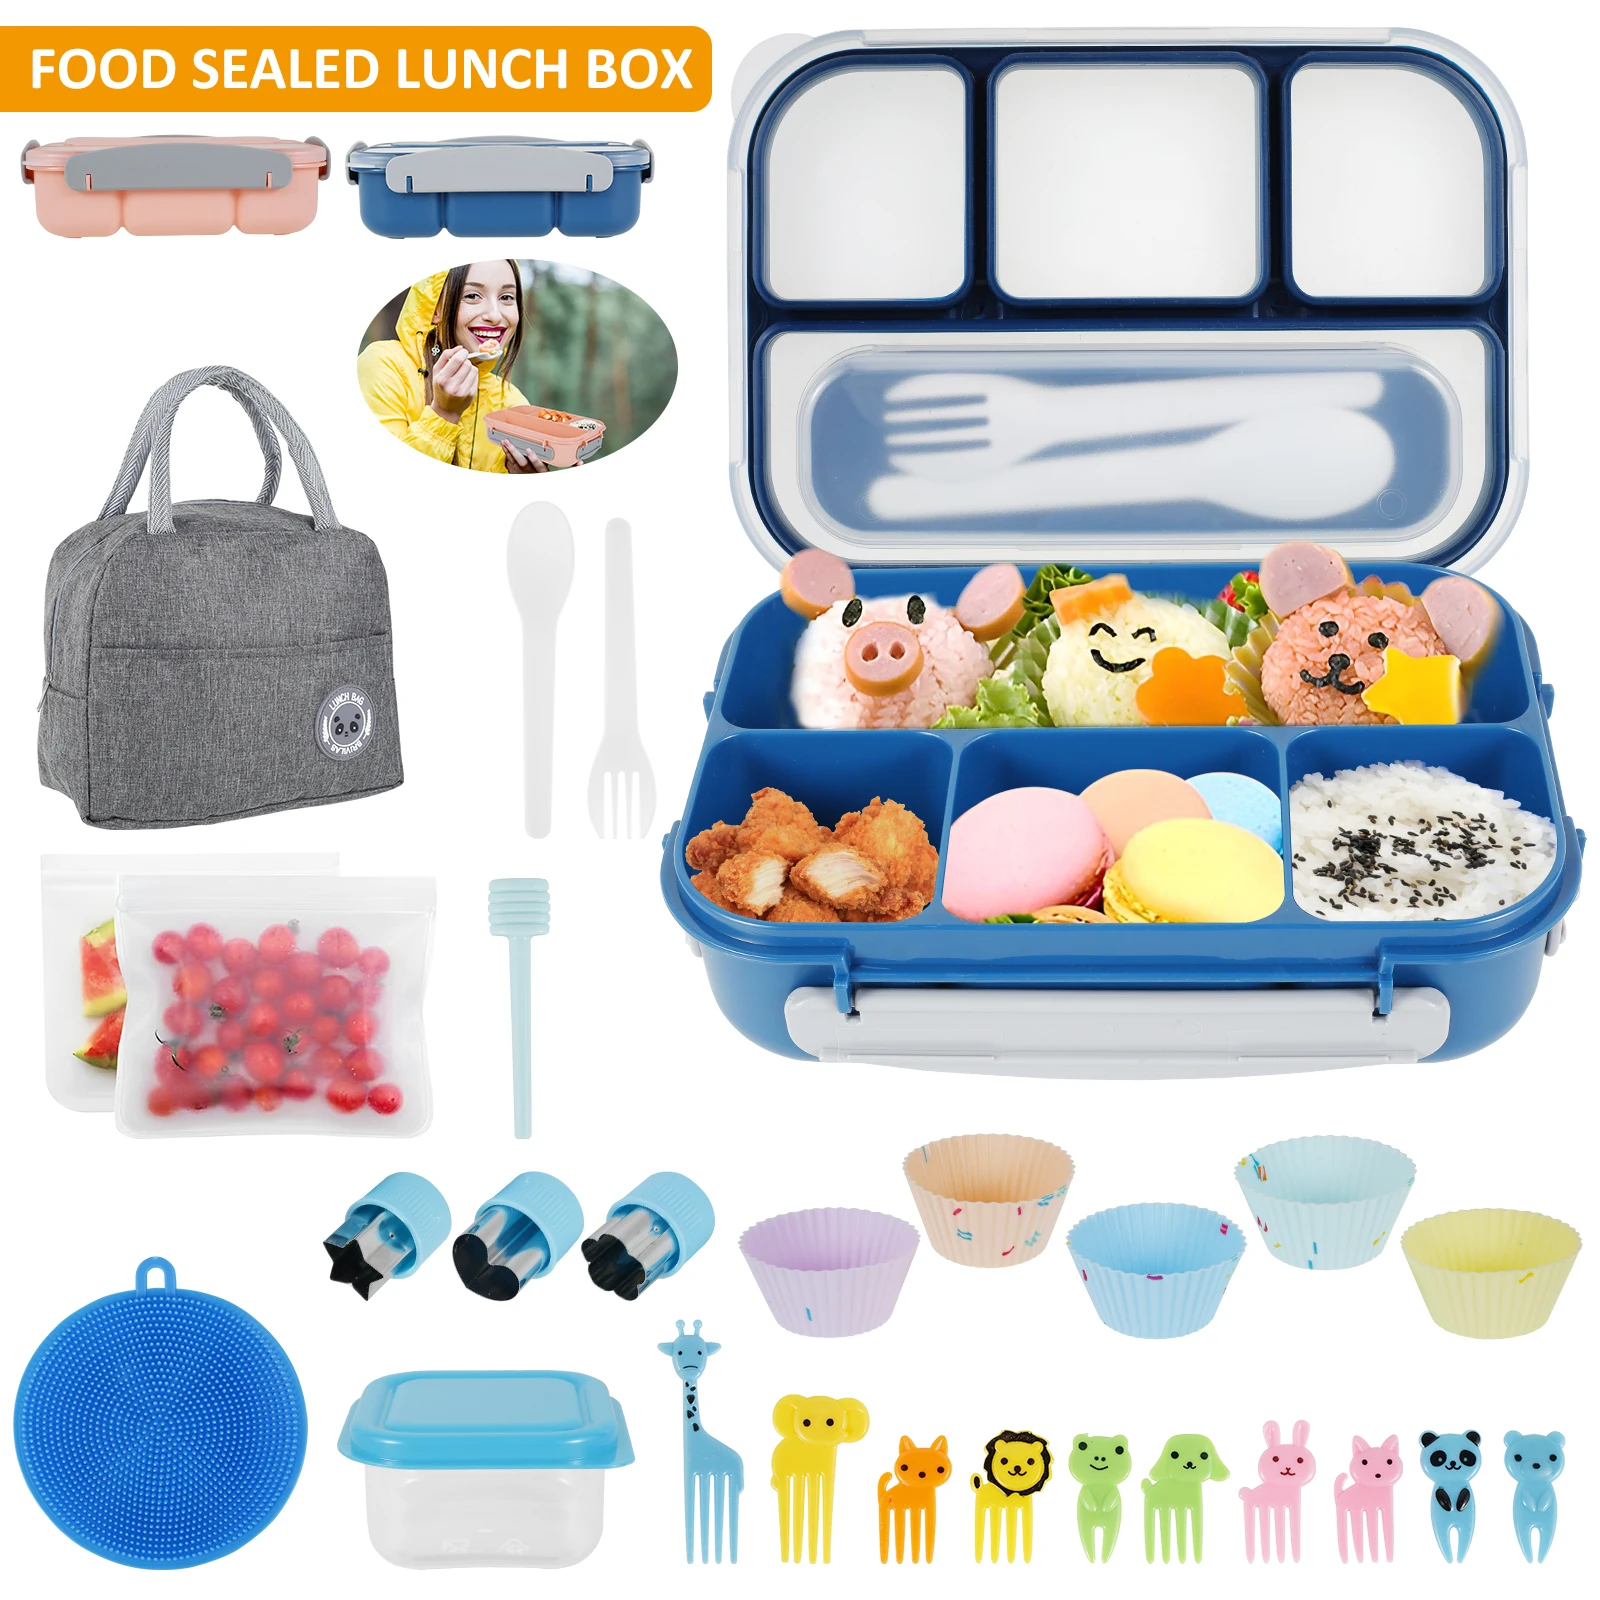 

27Pcs Bento Box Lunch Box Kit Reusable Bento Lunch Box Set 1300ml Lunch Food Container with Compartments Leak-proof Bento